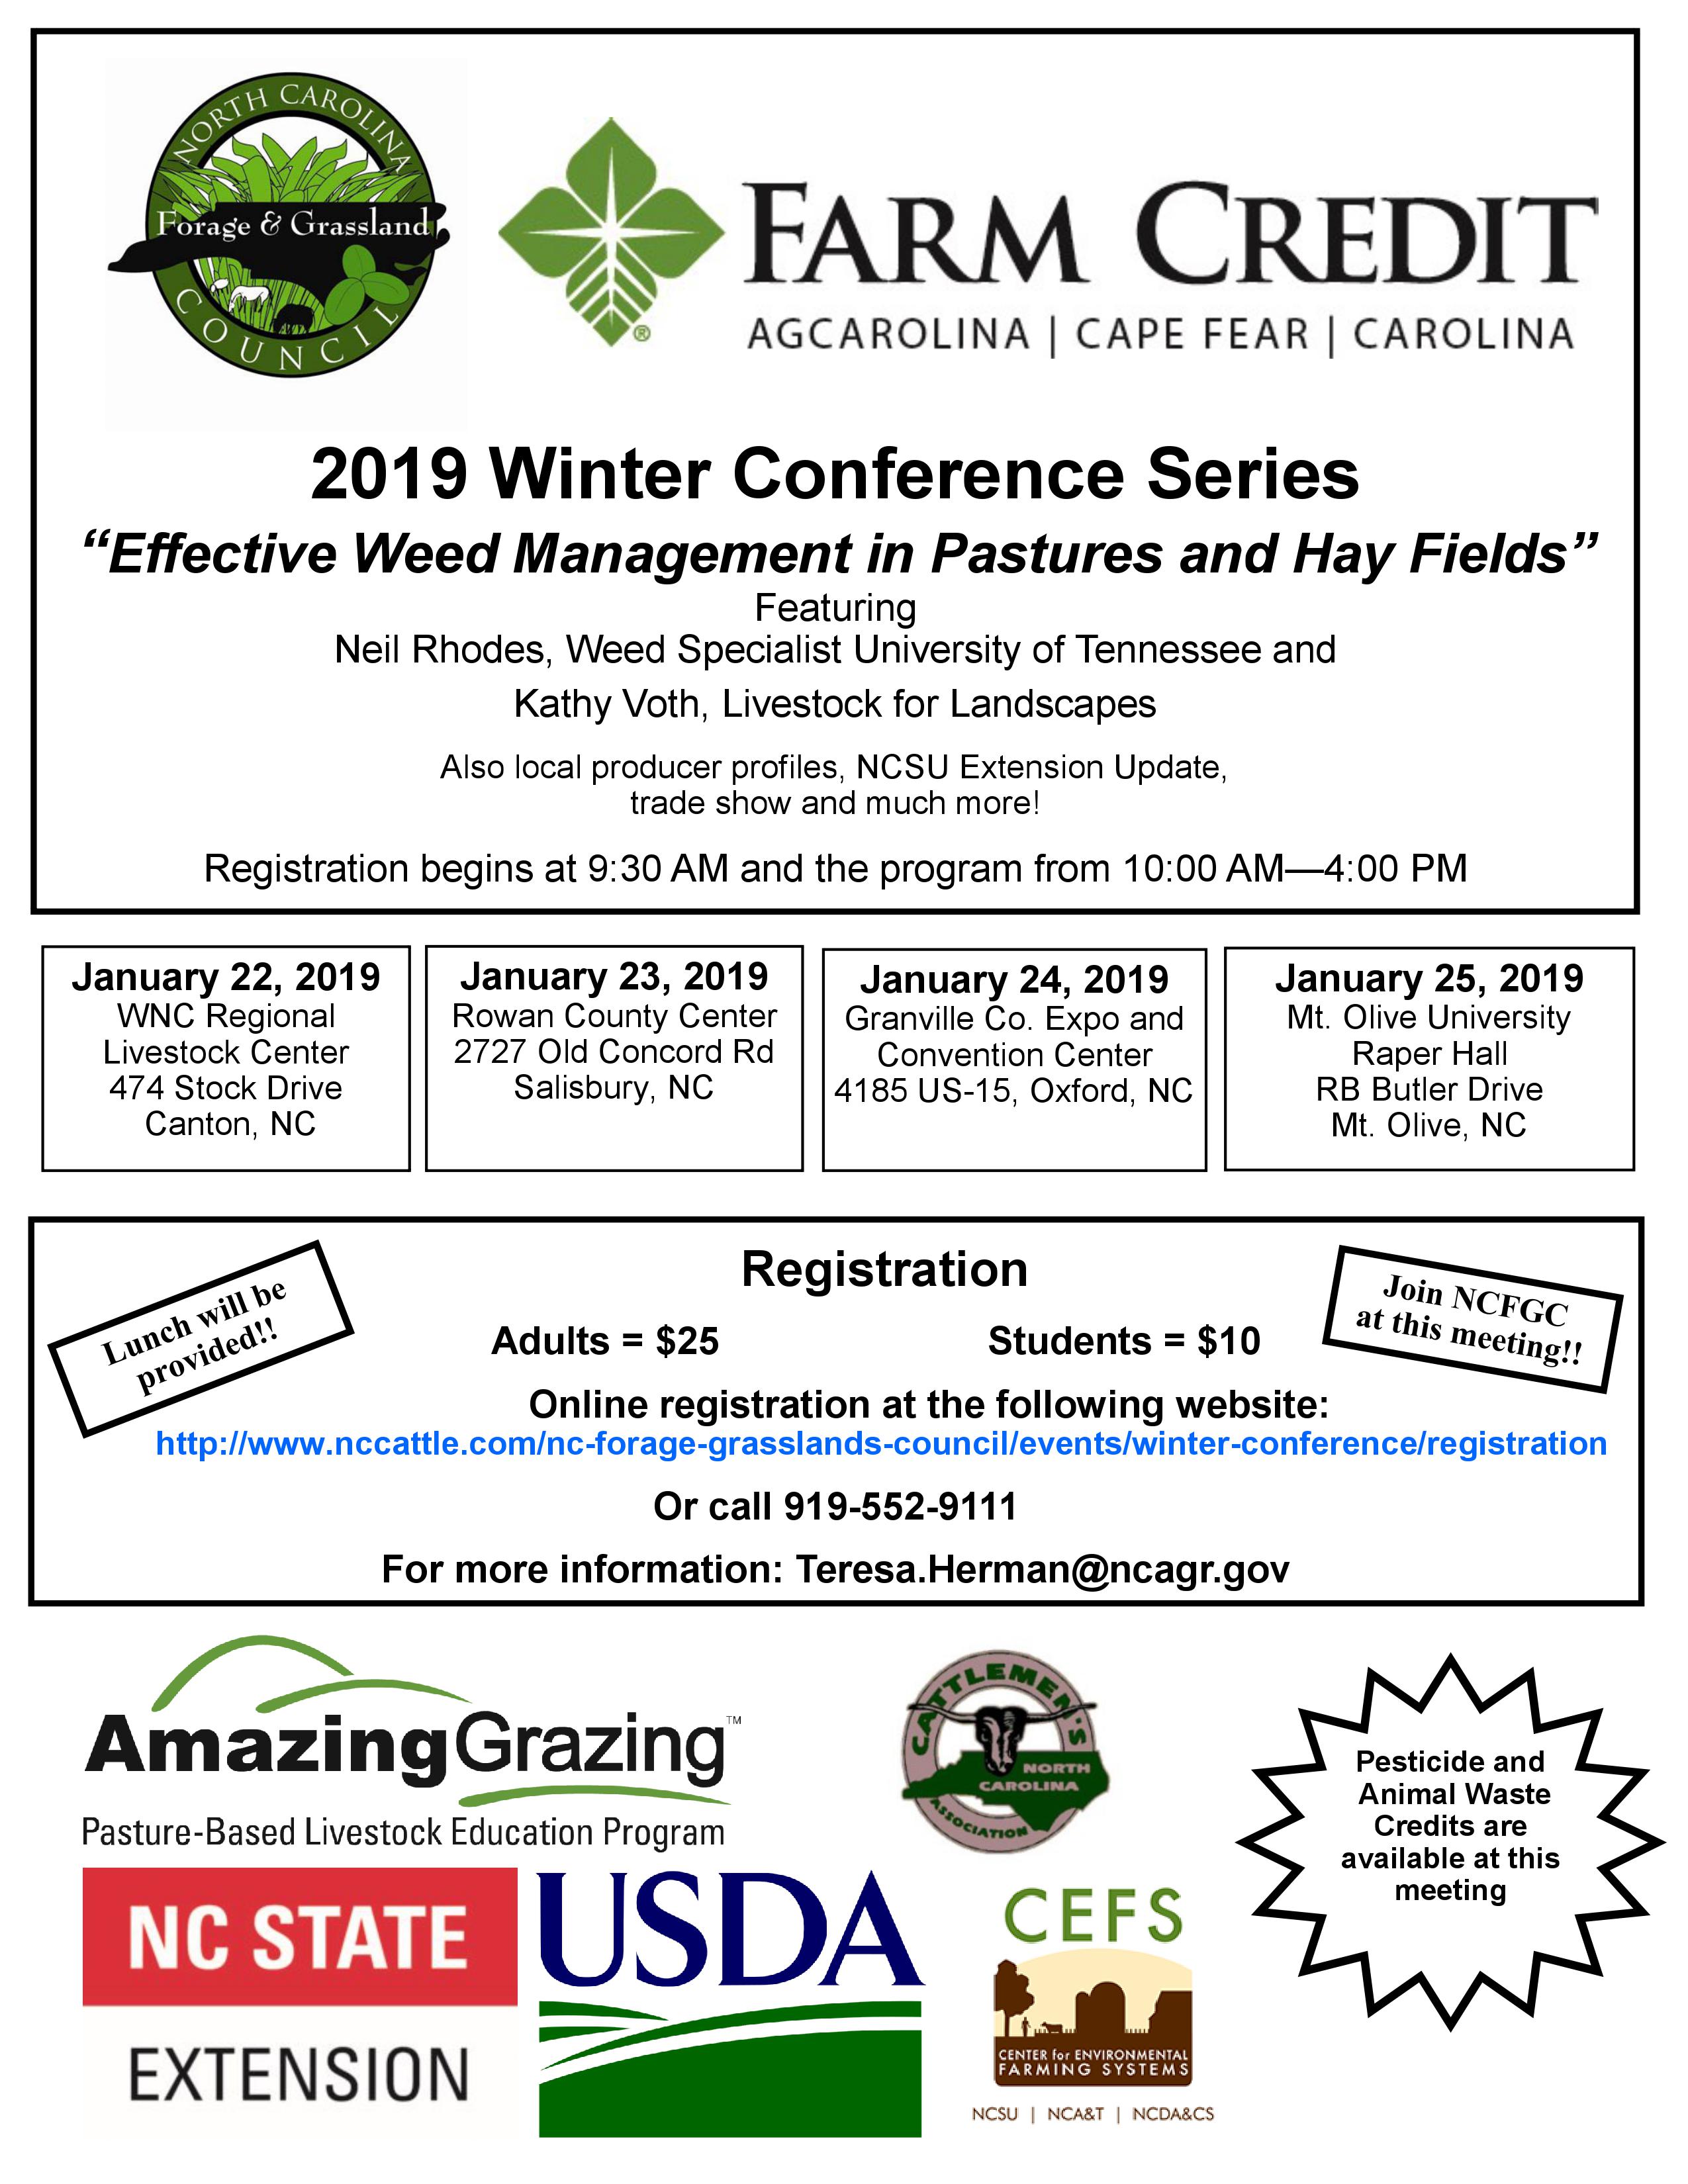 Winter Conference Series flyer image